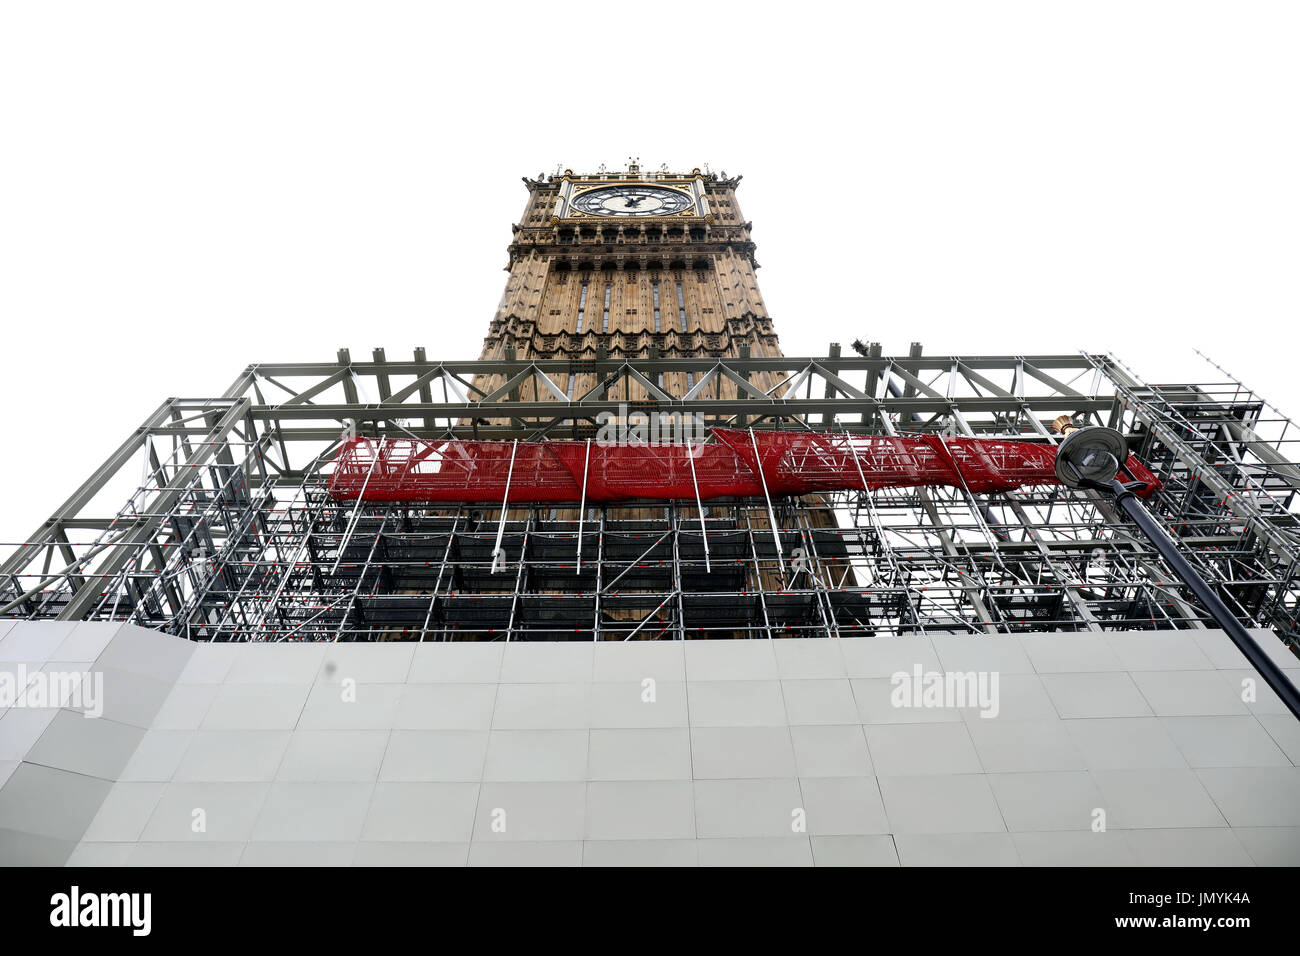 Pic shows: Scaffolding going up on Big Ben at the Houses of Parliament, House of Commons.  Easy life for some. Not for others today 28.7.17  But some  Stock Photo